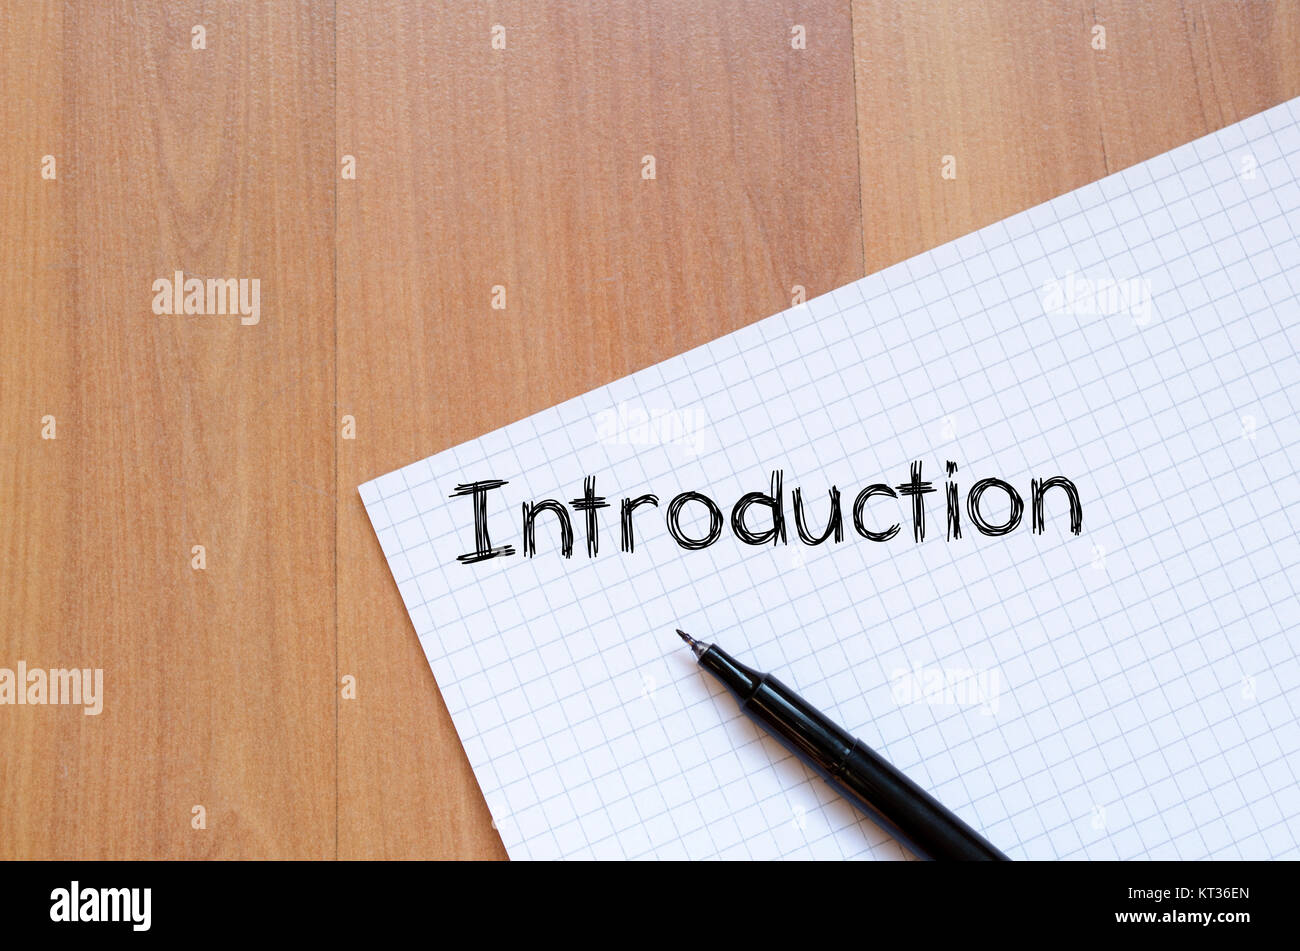 Introduction concept on notebook Stock Photo